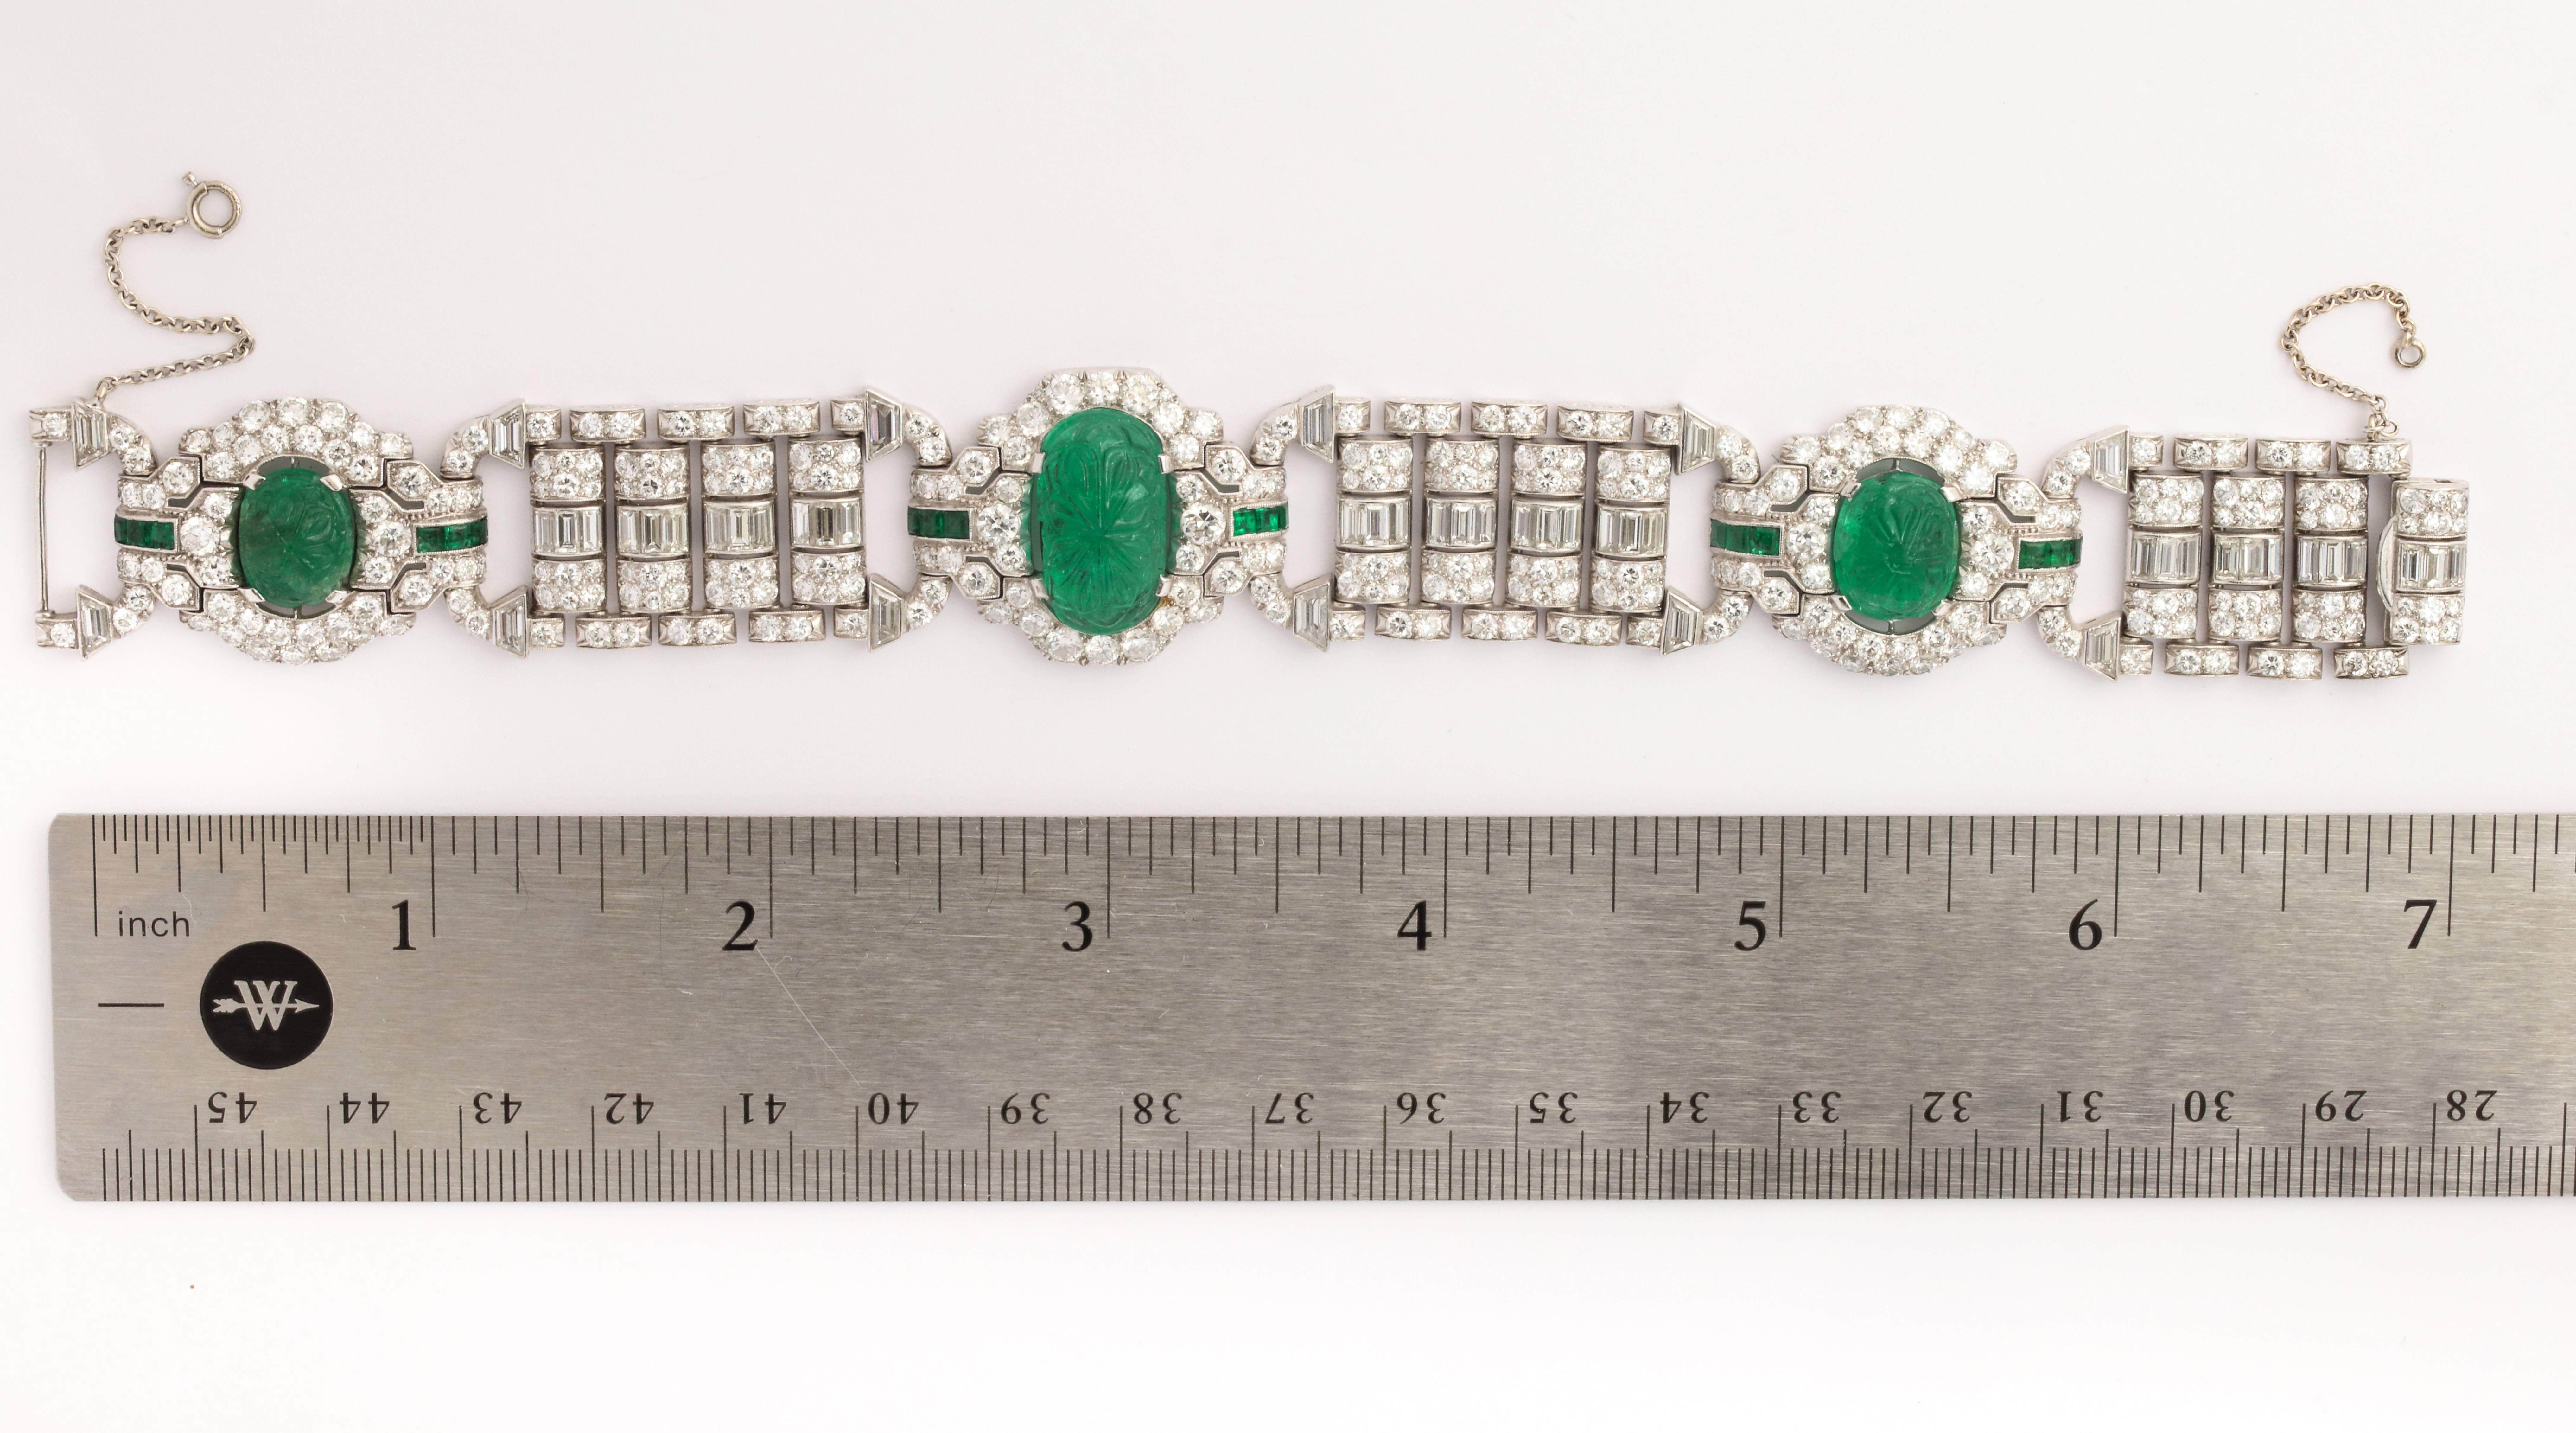 A beautiful Carved Emerald and Diamond Bracelet

Featuring three very rare antique emeralds

Made Circa 1920

Measurements: 7